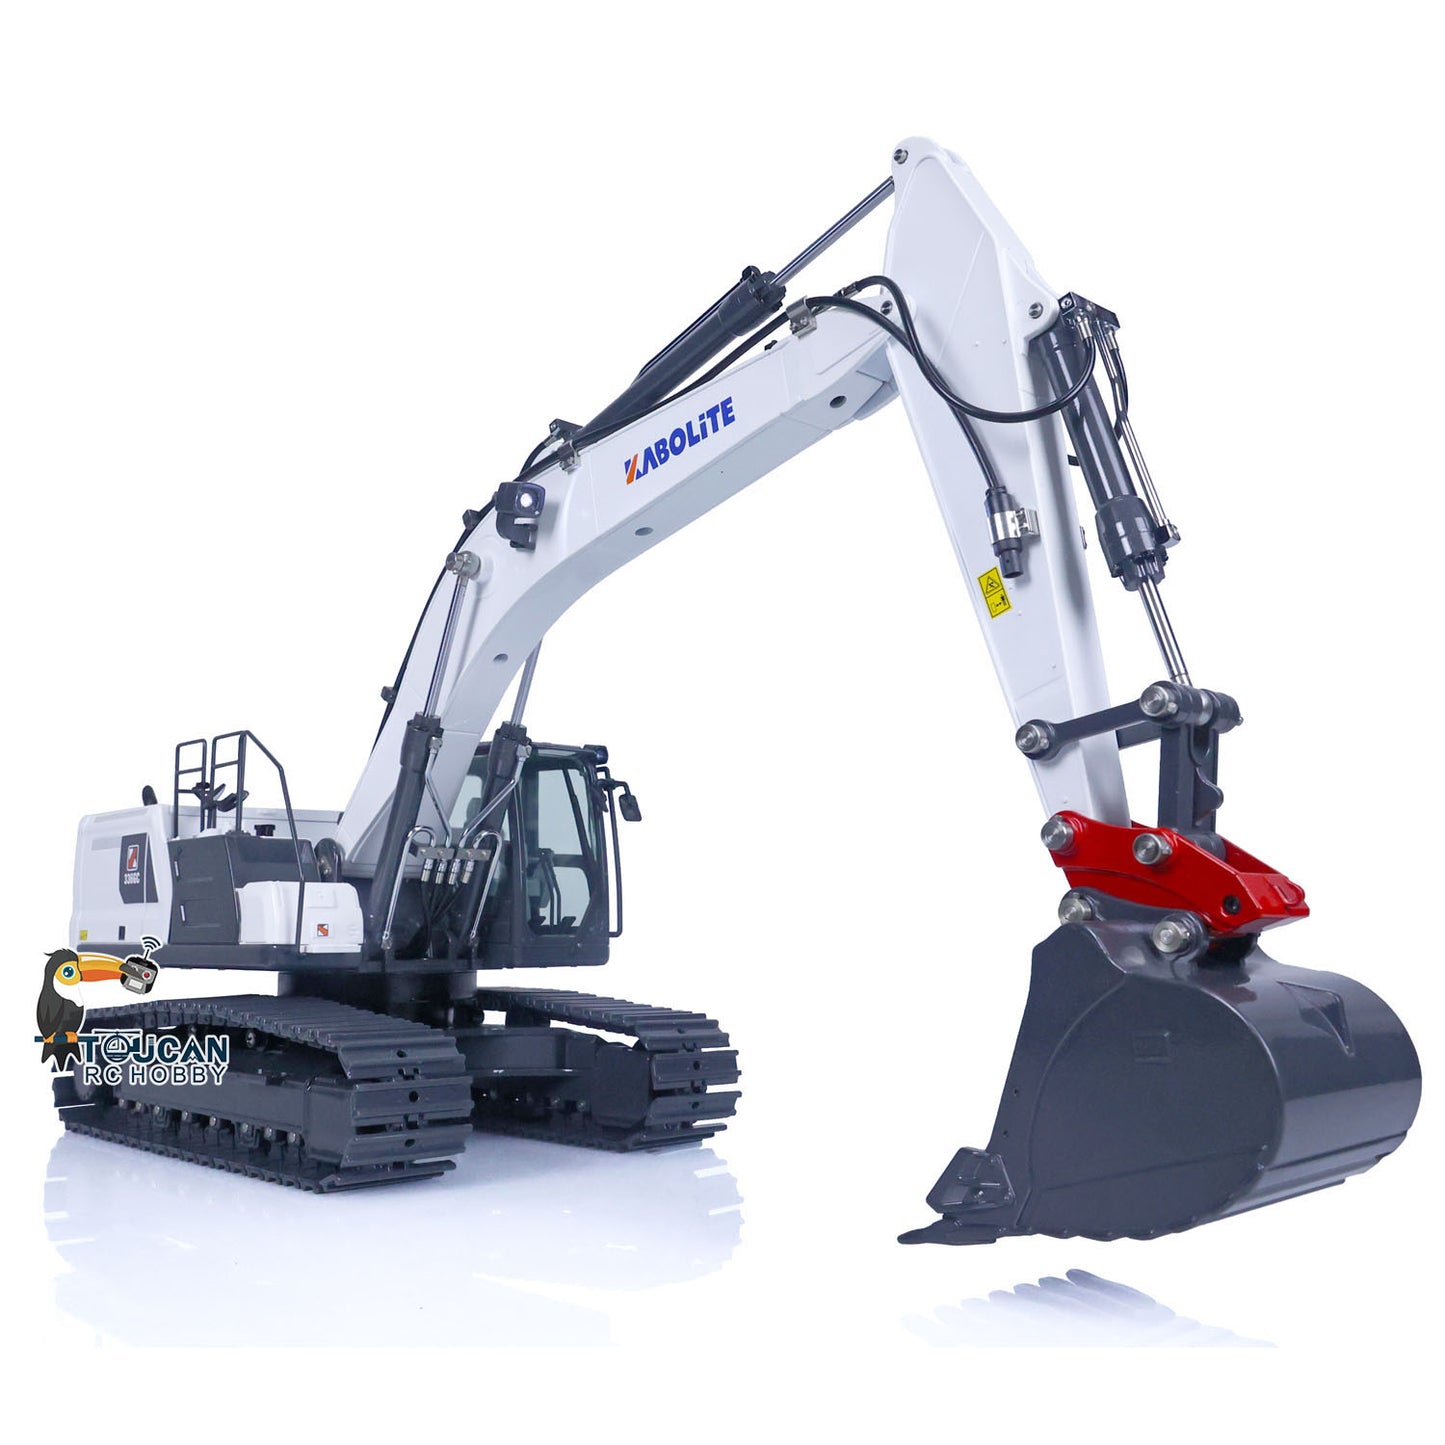 IN STOCK Kabolite K961S 1/18 RC Hydraulic Excavator Upgraded Version K336GC Radio Controlled Digger Electric Vehicle DIY Models